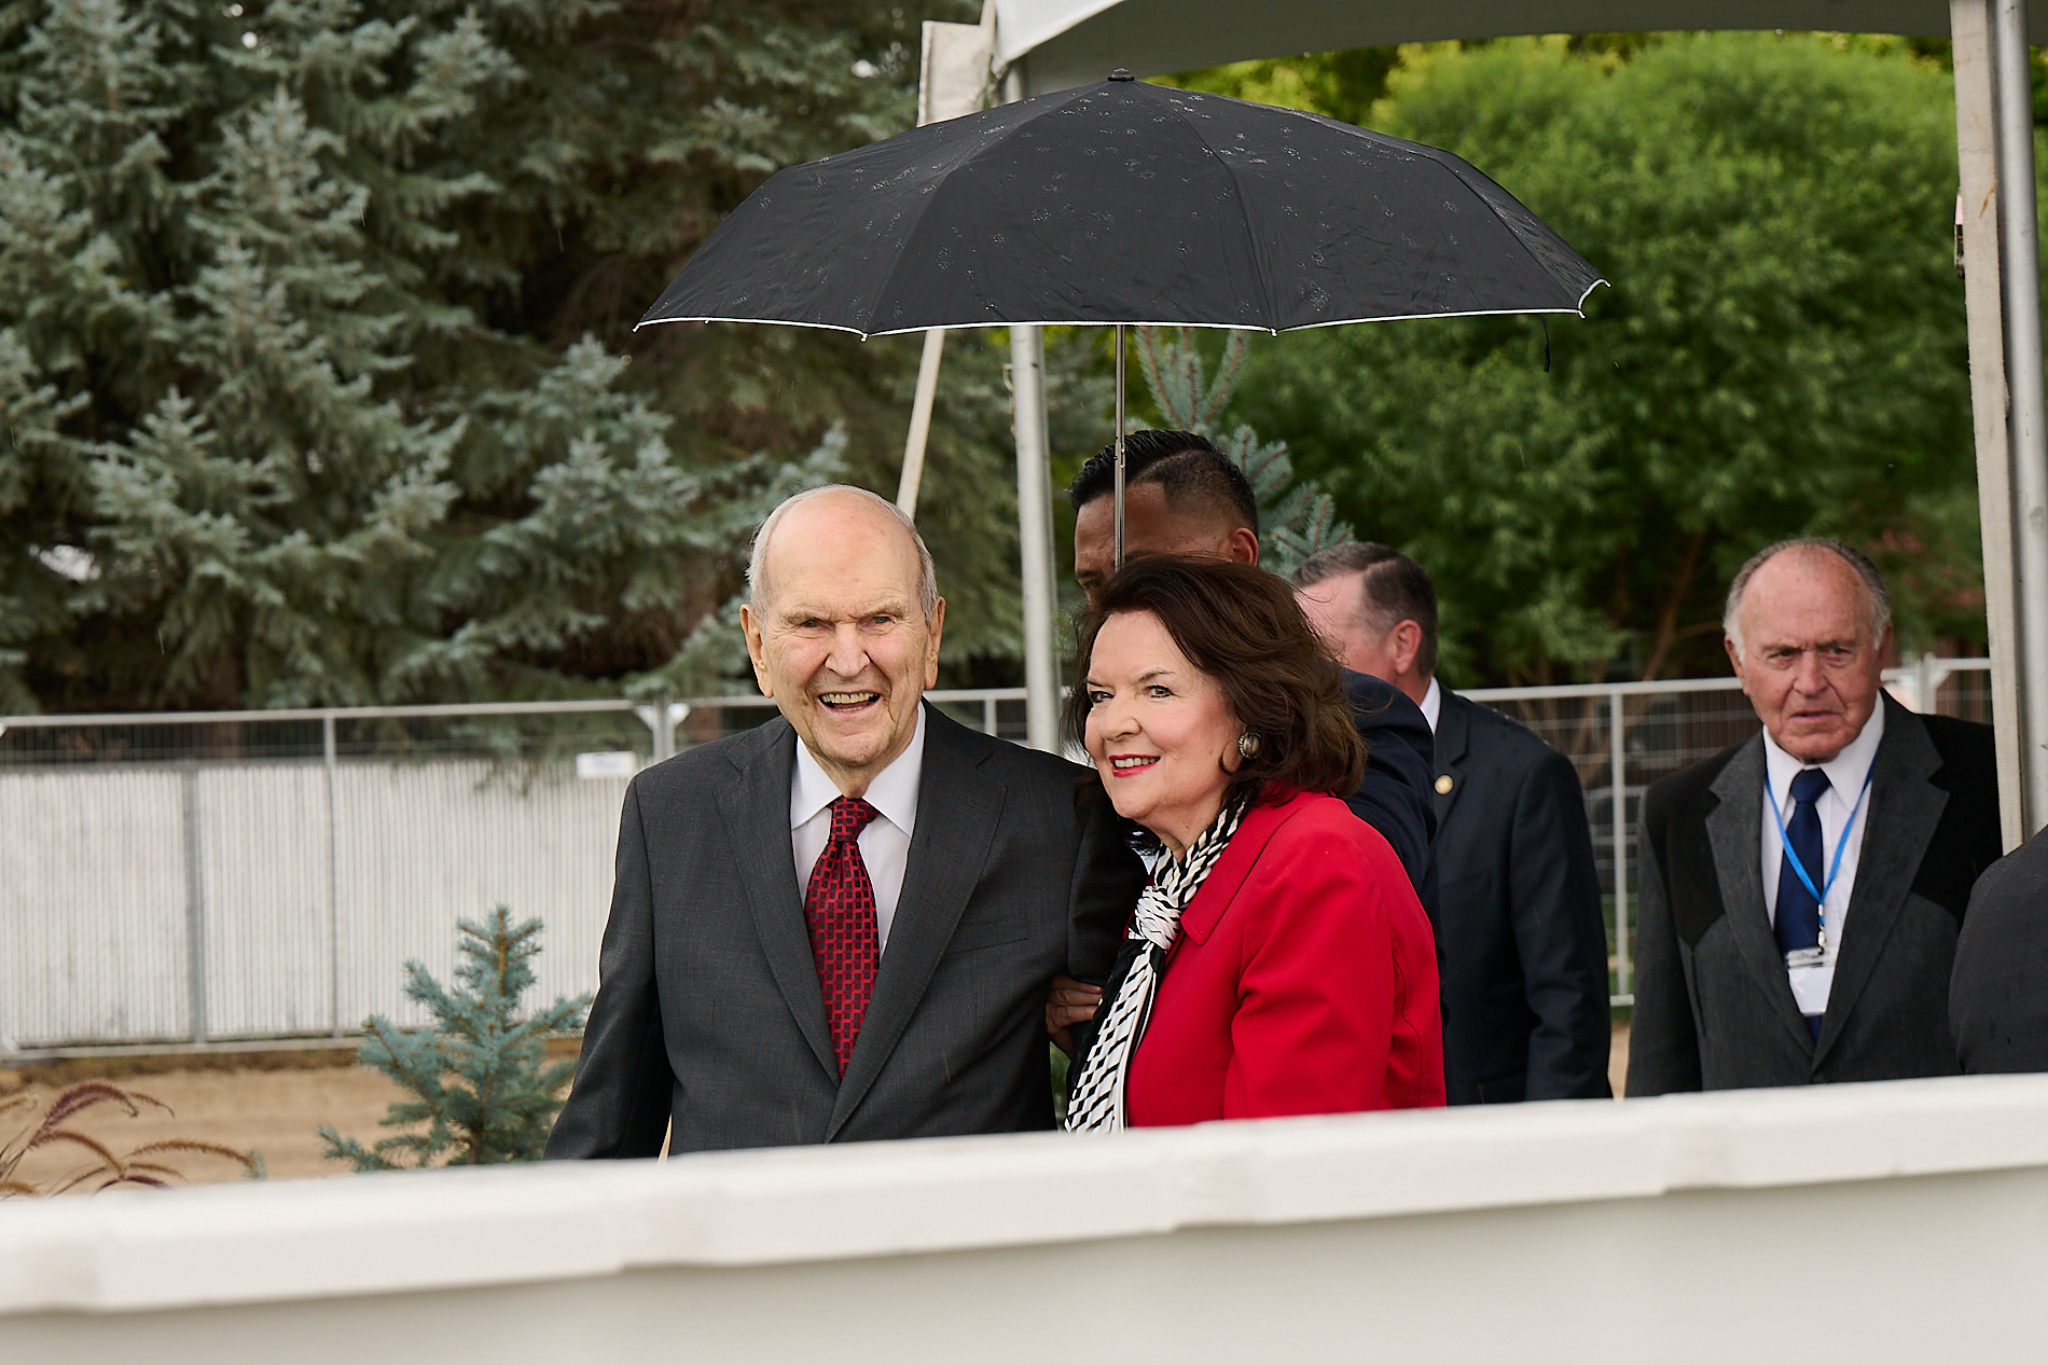 President and Sister Nelson standing together under an umbrella and smiling.